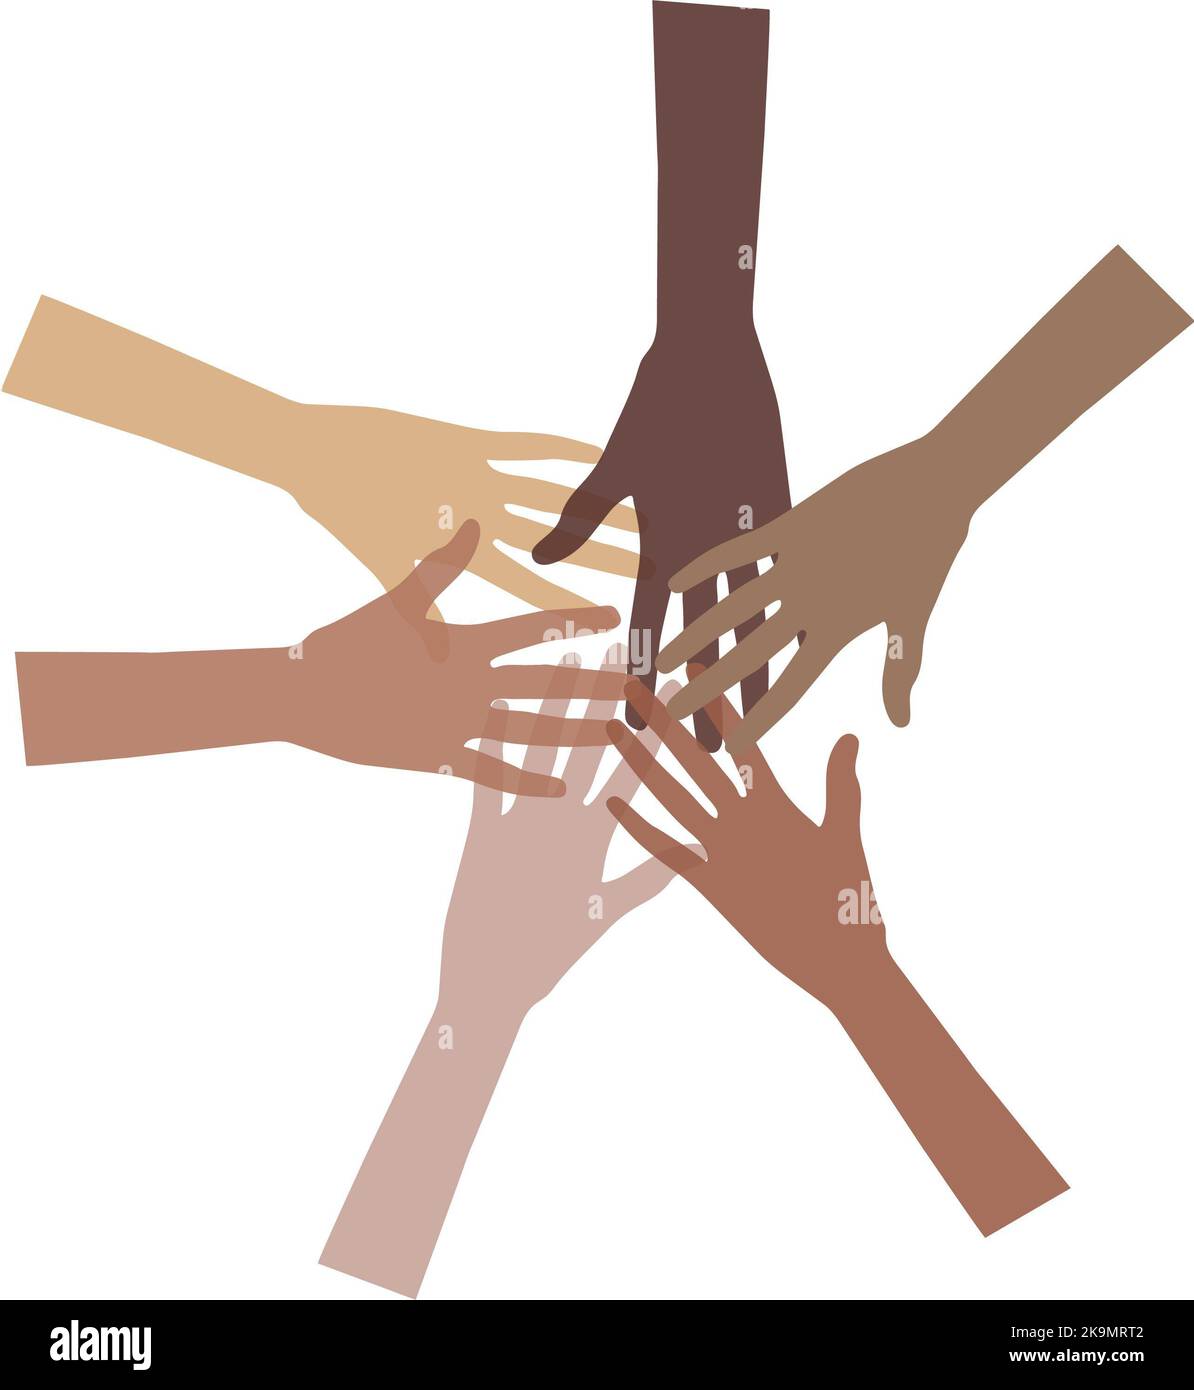 vector illustration People different skin colors Hands in PNG isolated on transparent background Silhouettes of Hand Gesture. Stock Photo